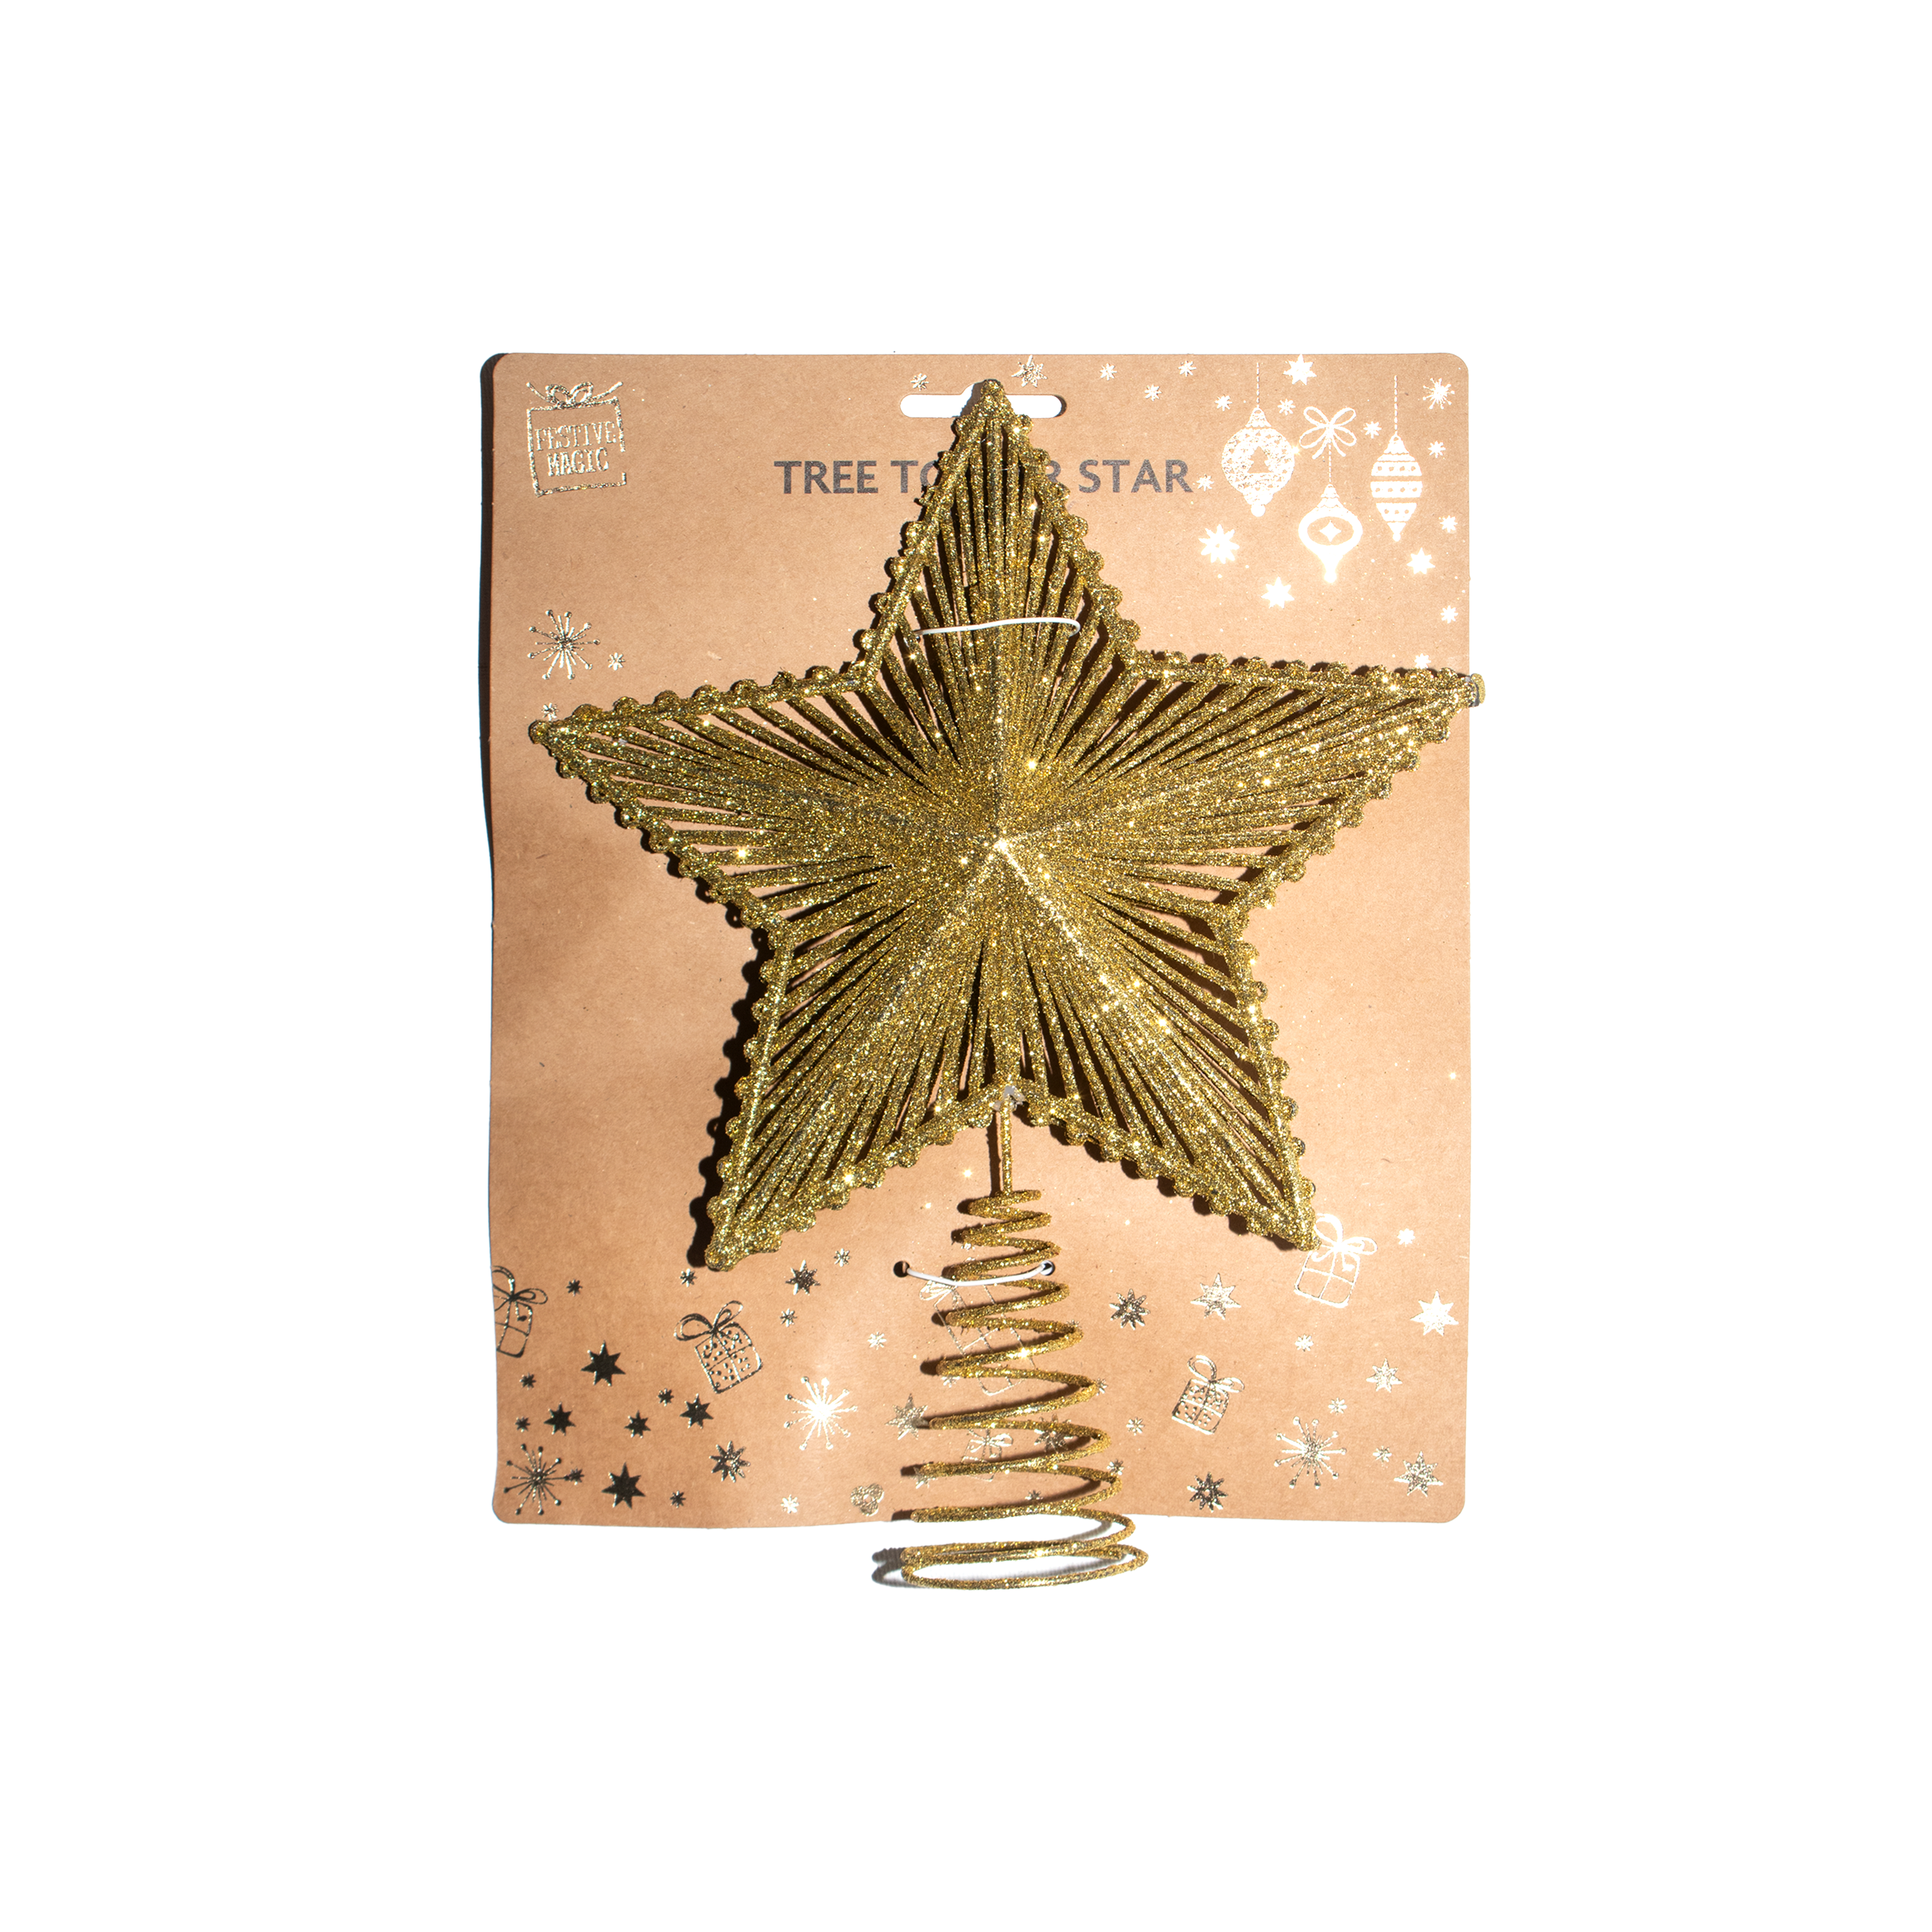 Tree Topper - Star, 20cm, Assorted  Color / Assorted Design 1pc